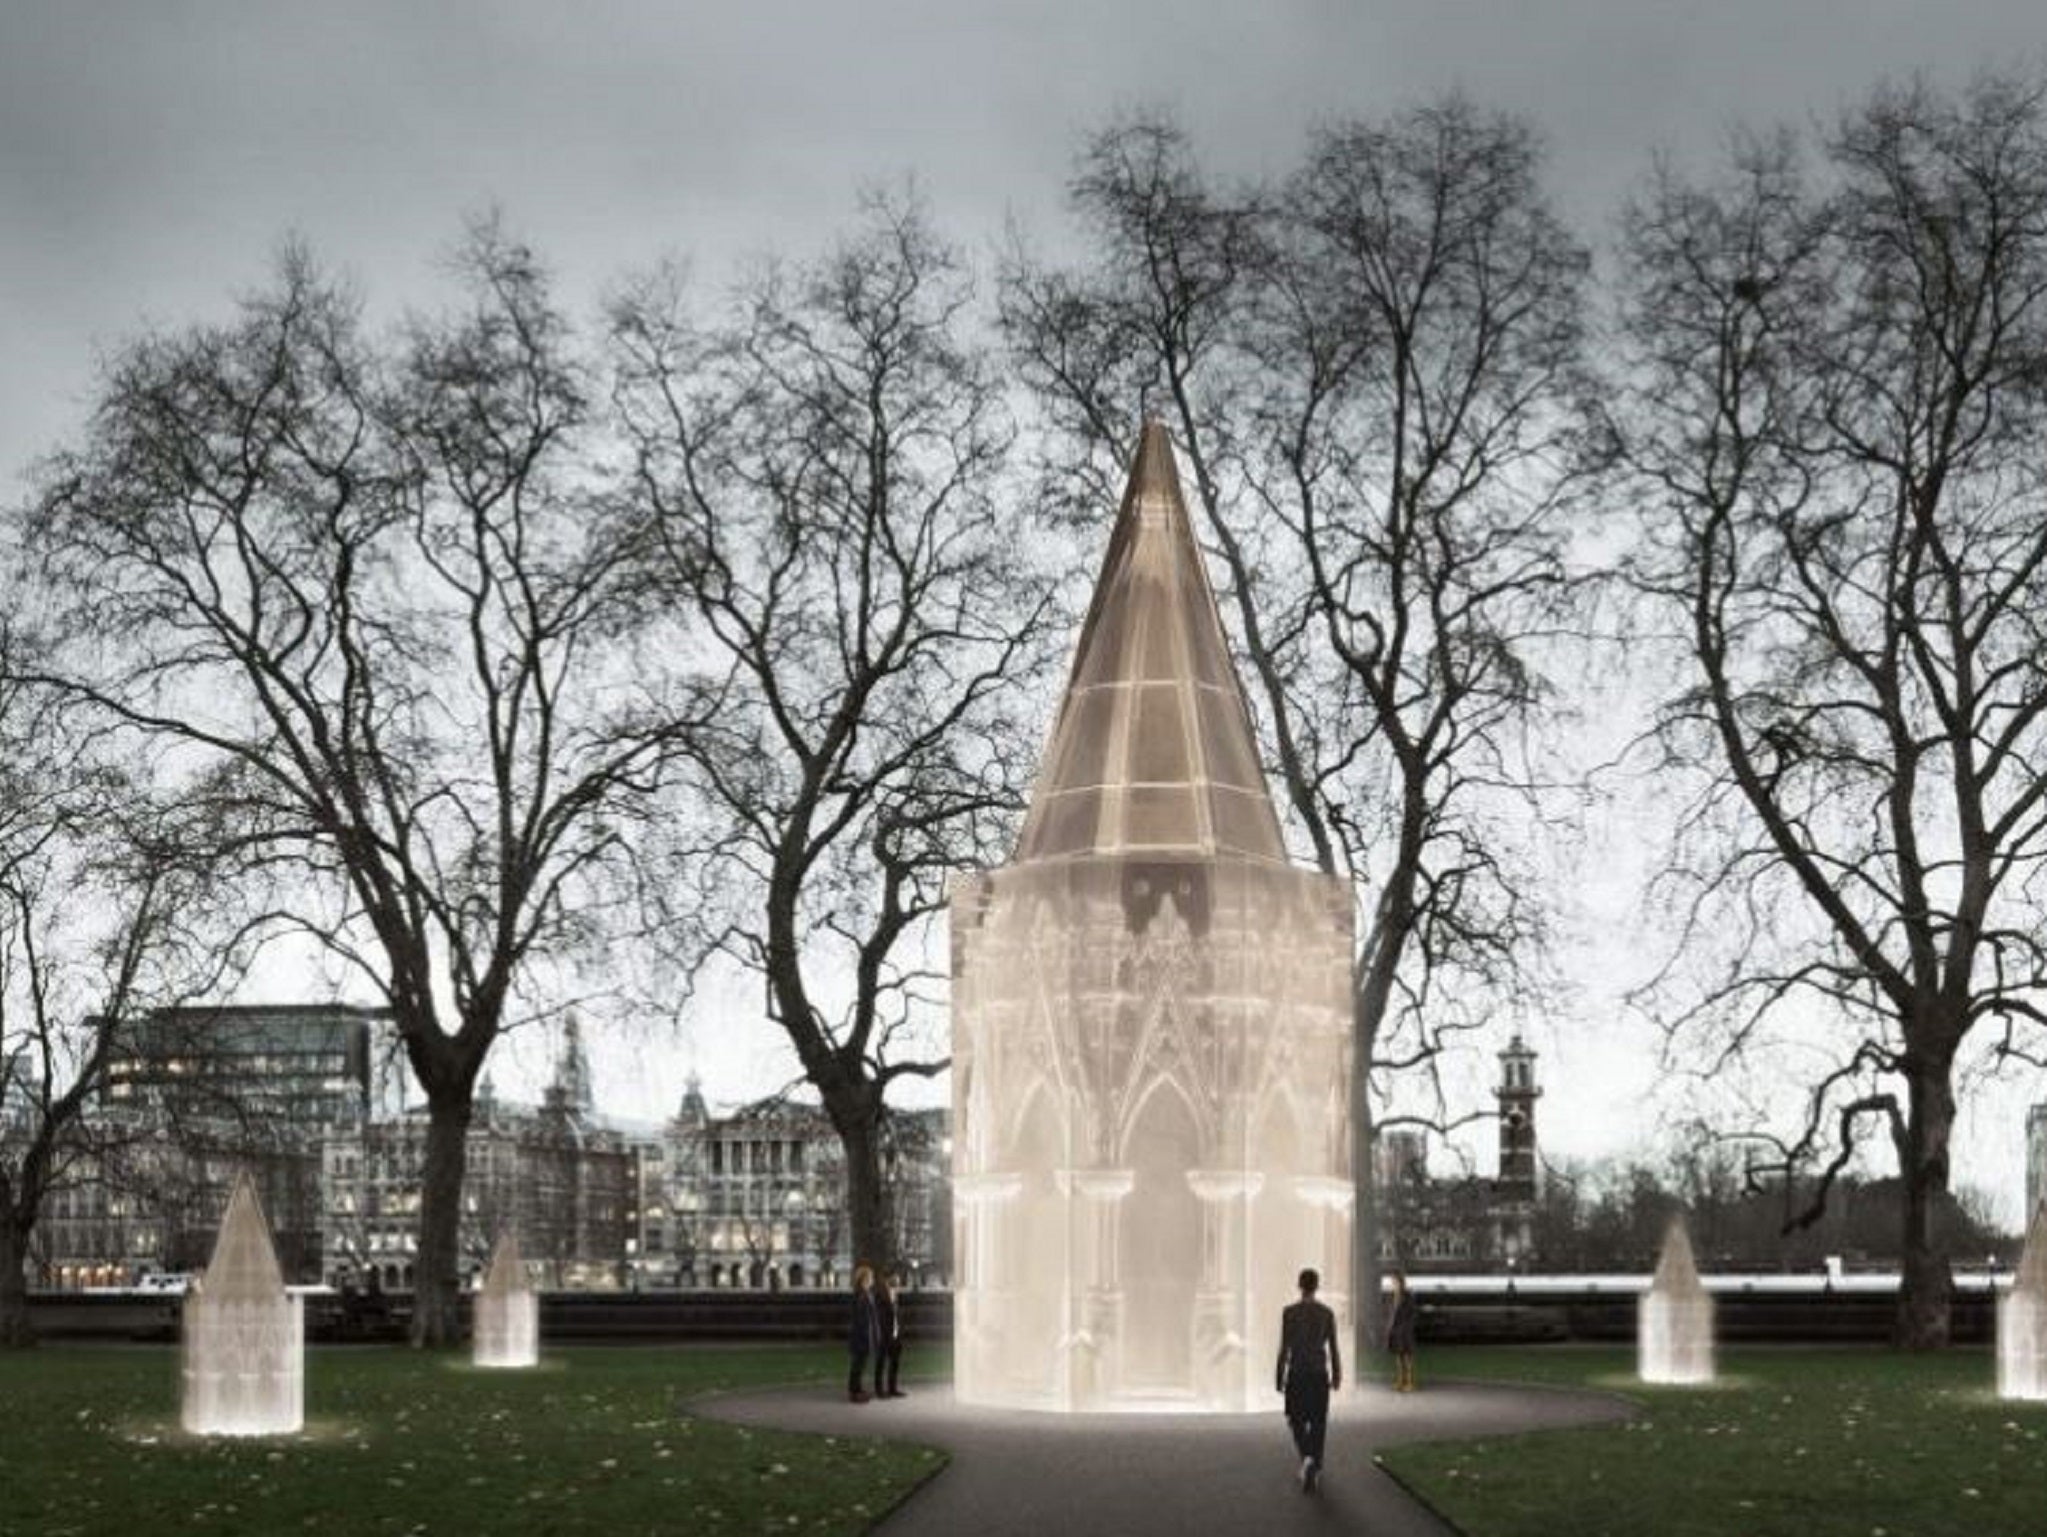 Ten designs have been shortlisted for the memorial garden set for completion by 2021